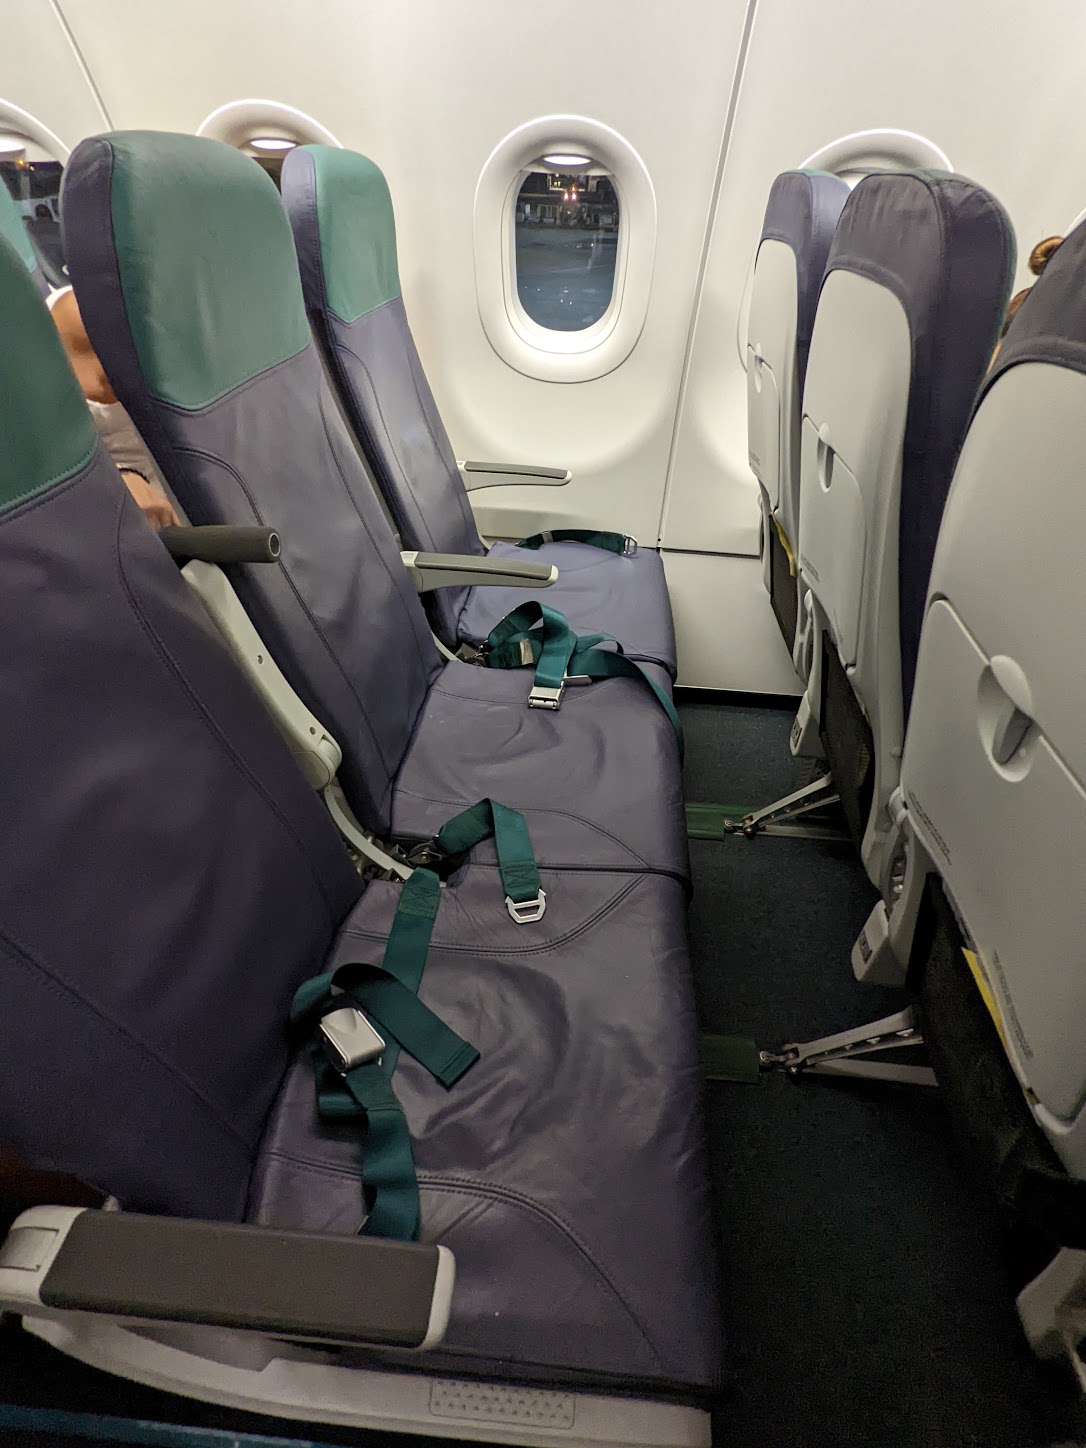 seats in an airplane with seats and windows